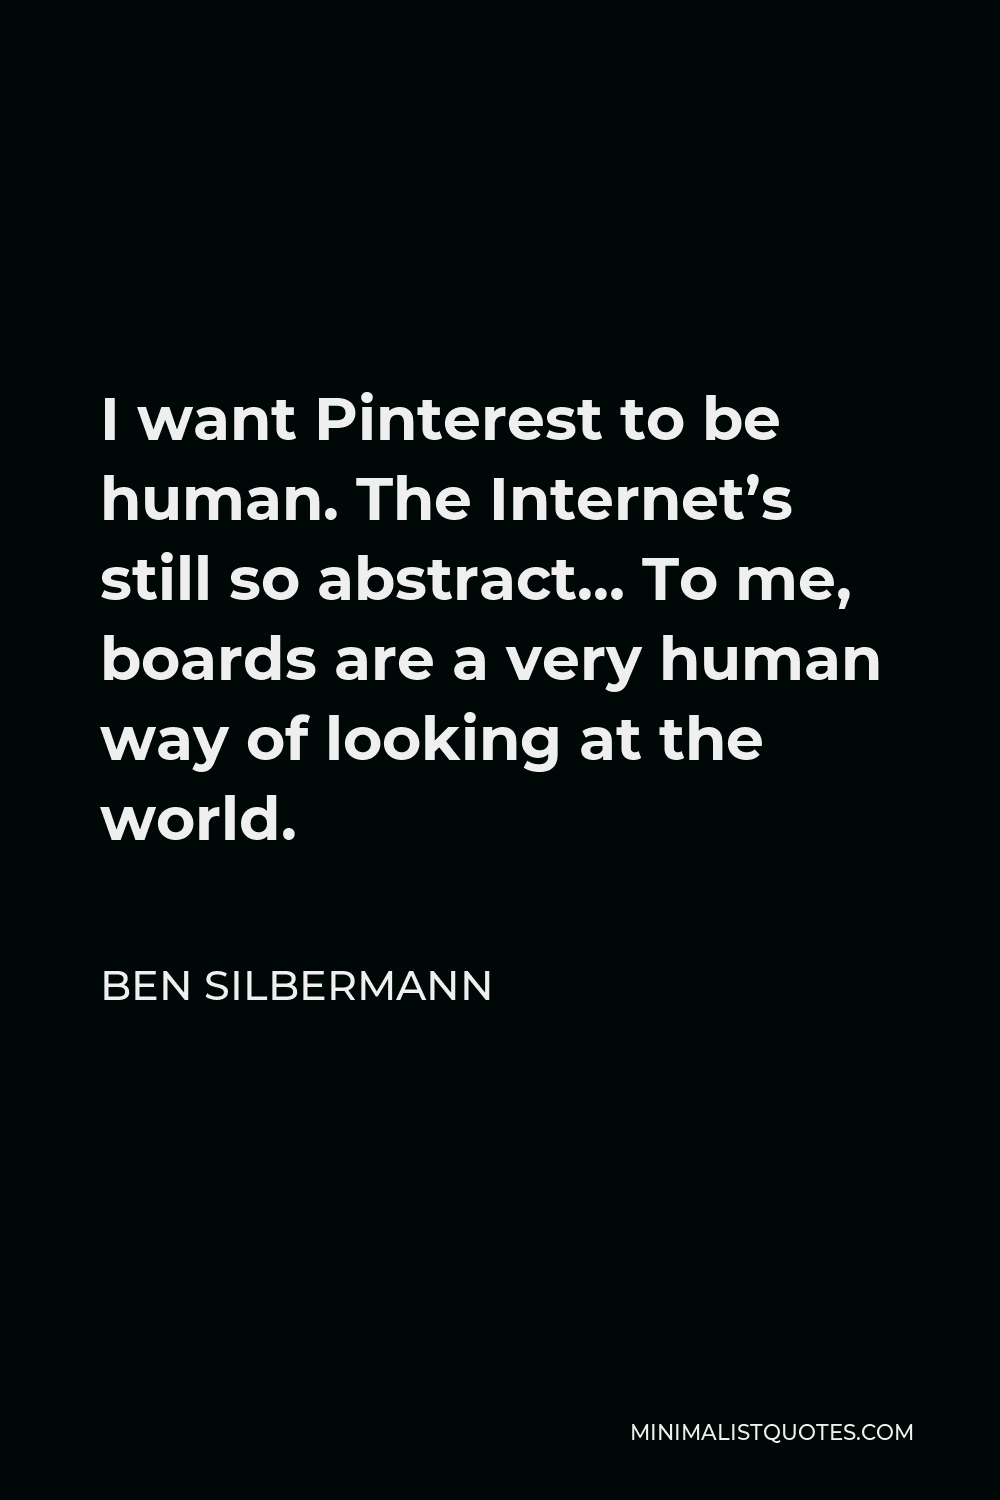 Ben Silbermann Quote - I want Pinterest to be human. The Internet’s still so abstract… To me, boards are a very human way of looking at the world.